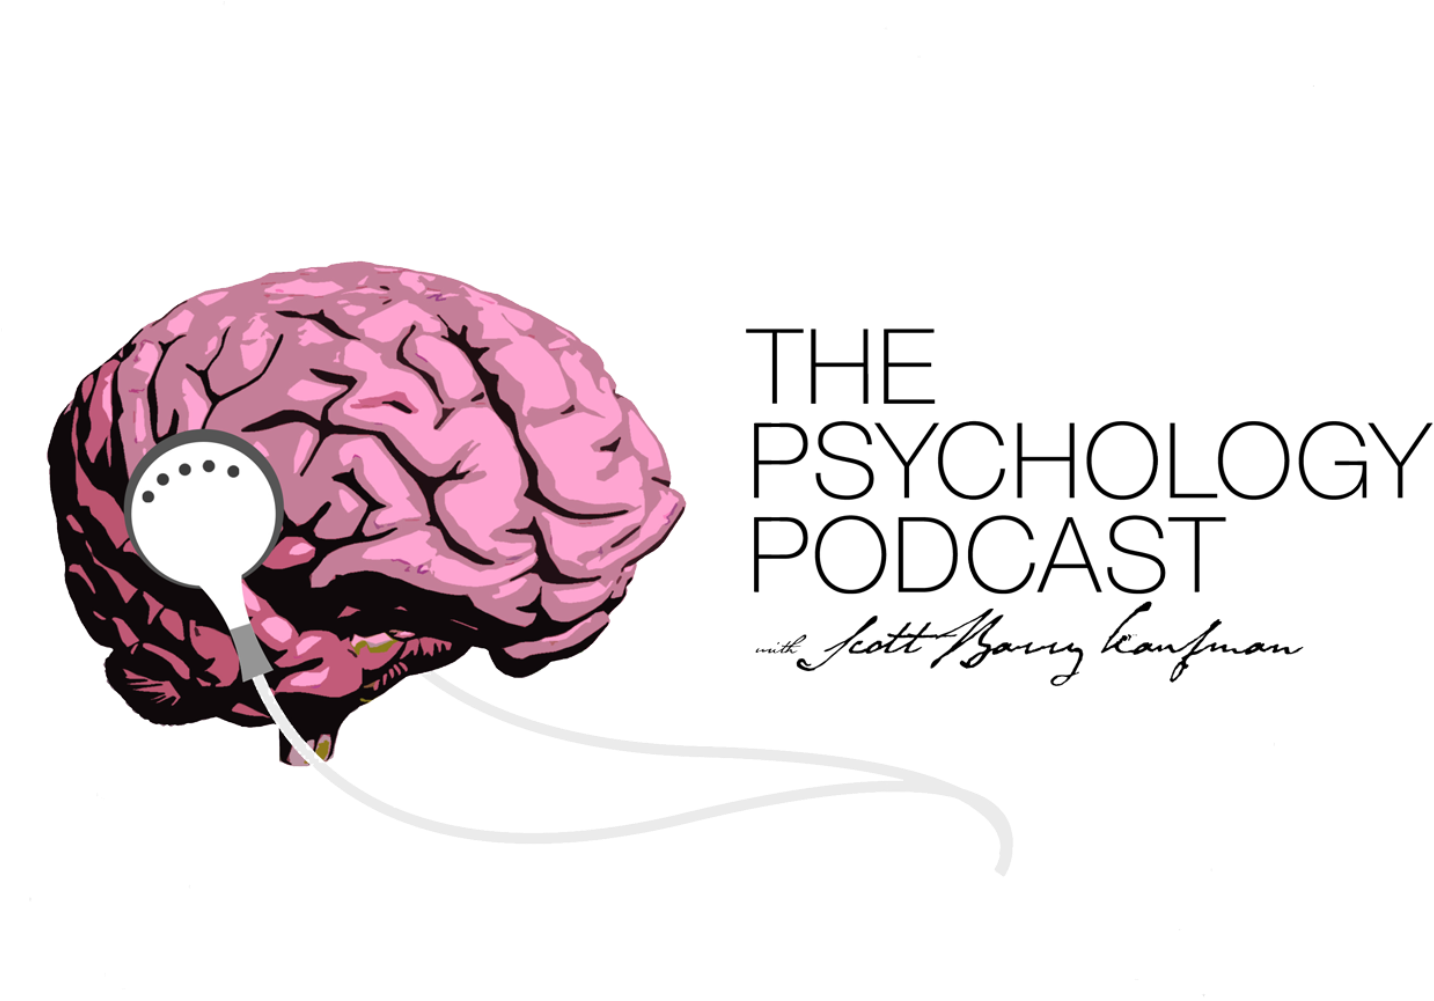 A Pink Brain With A White Headphone Attached To It